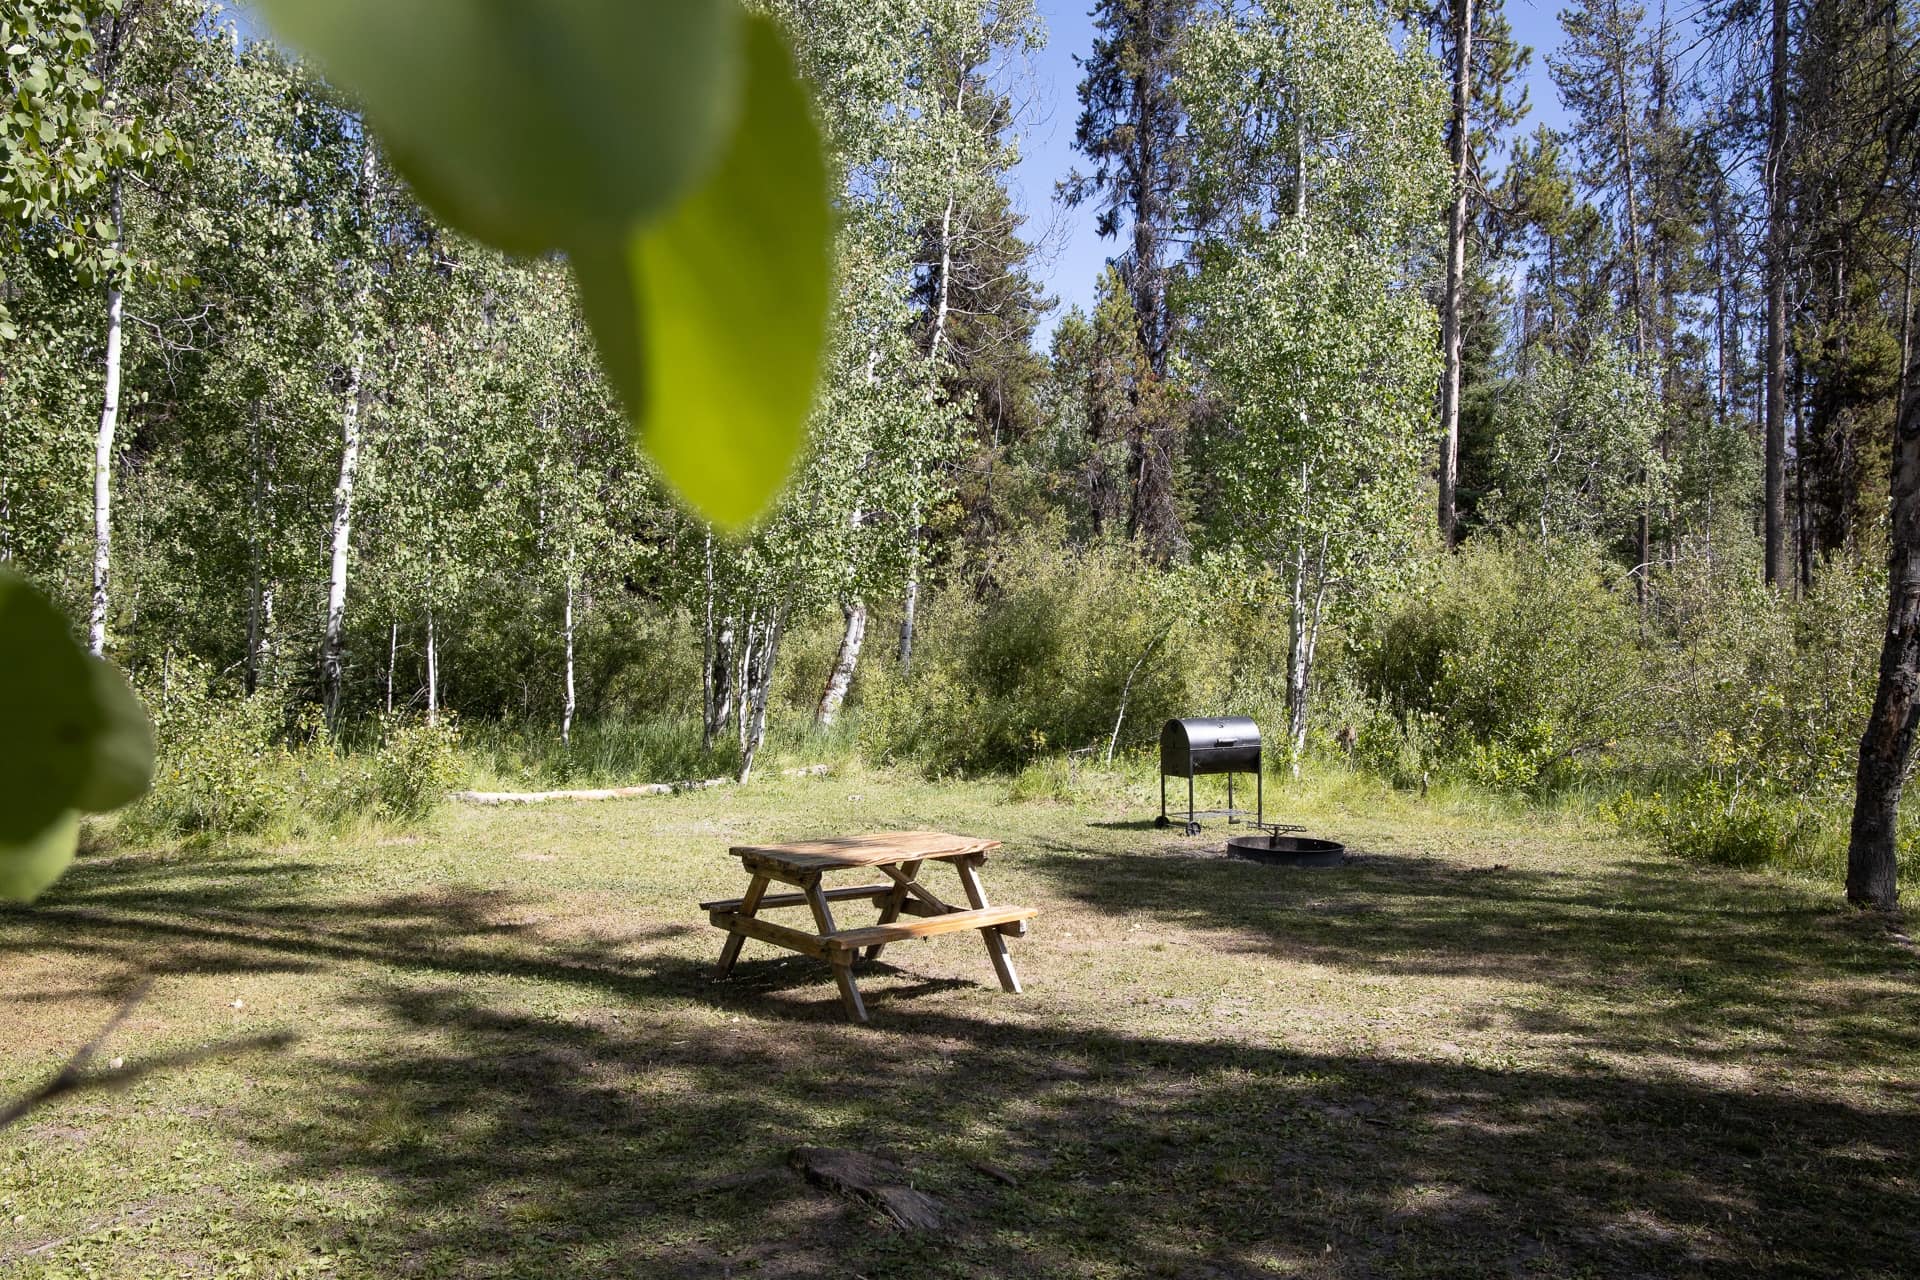 The campground at the Warm Lake Lodge